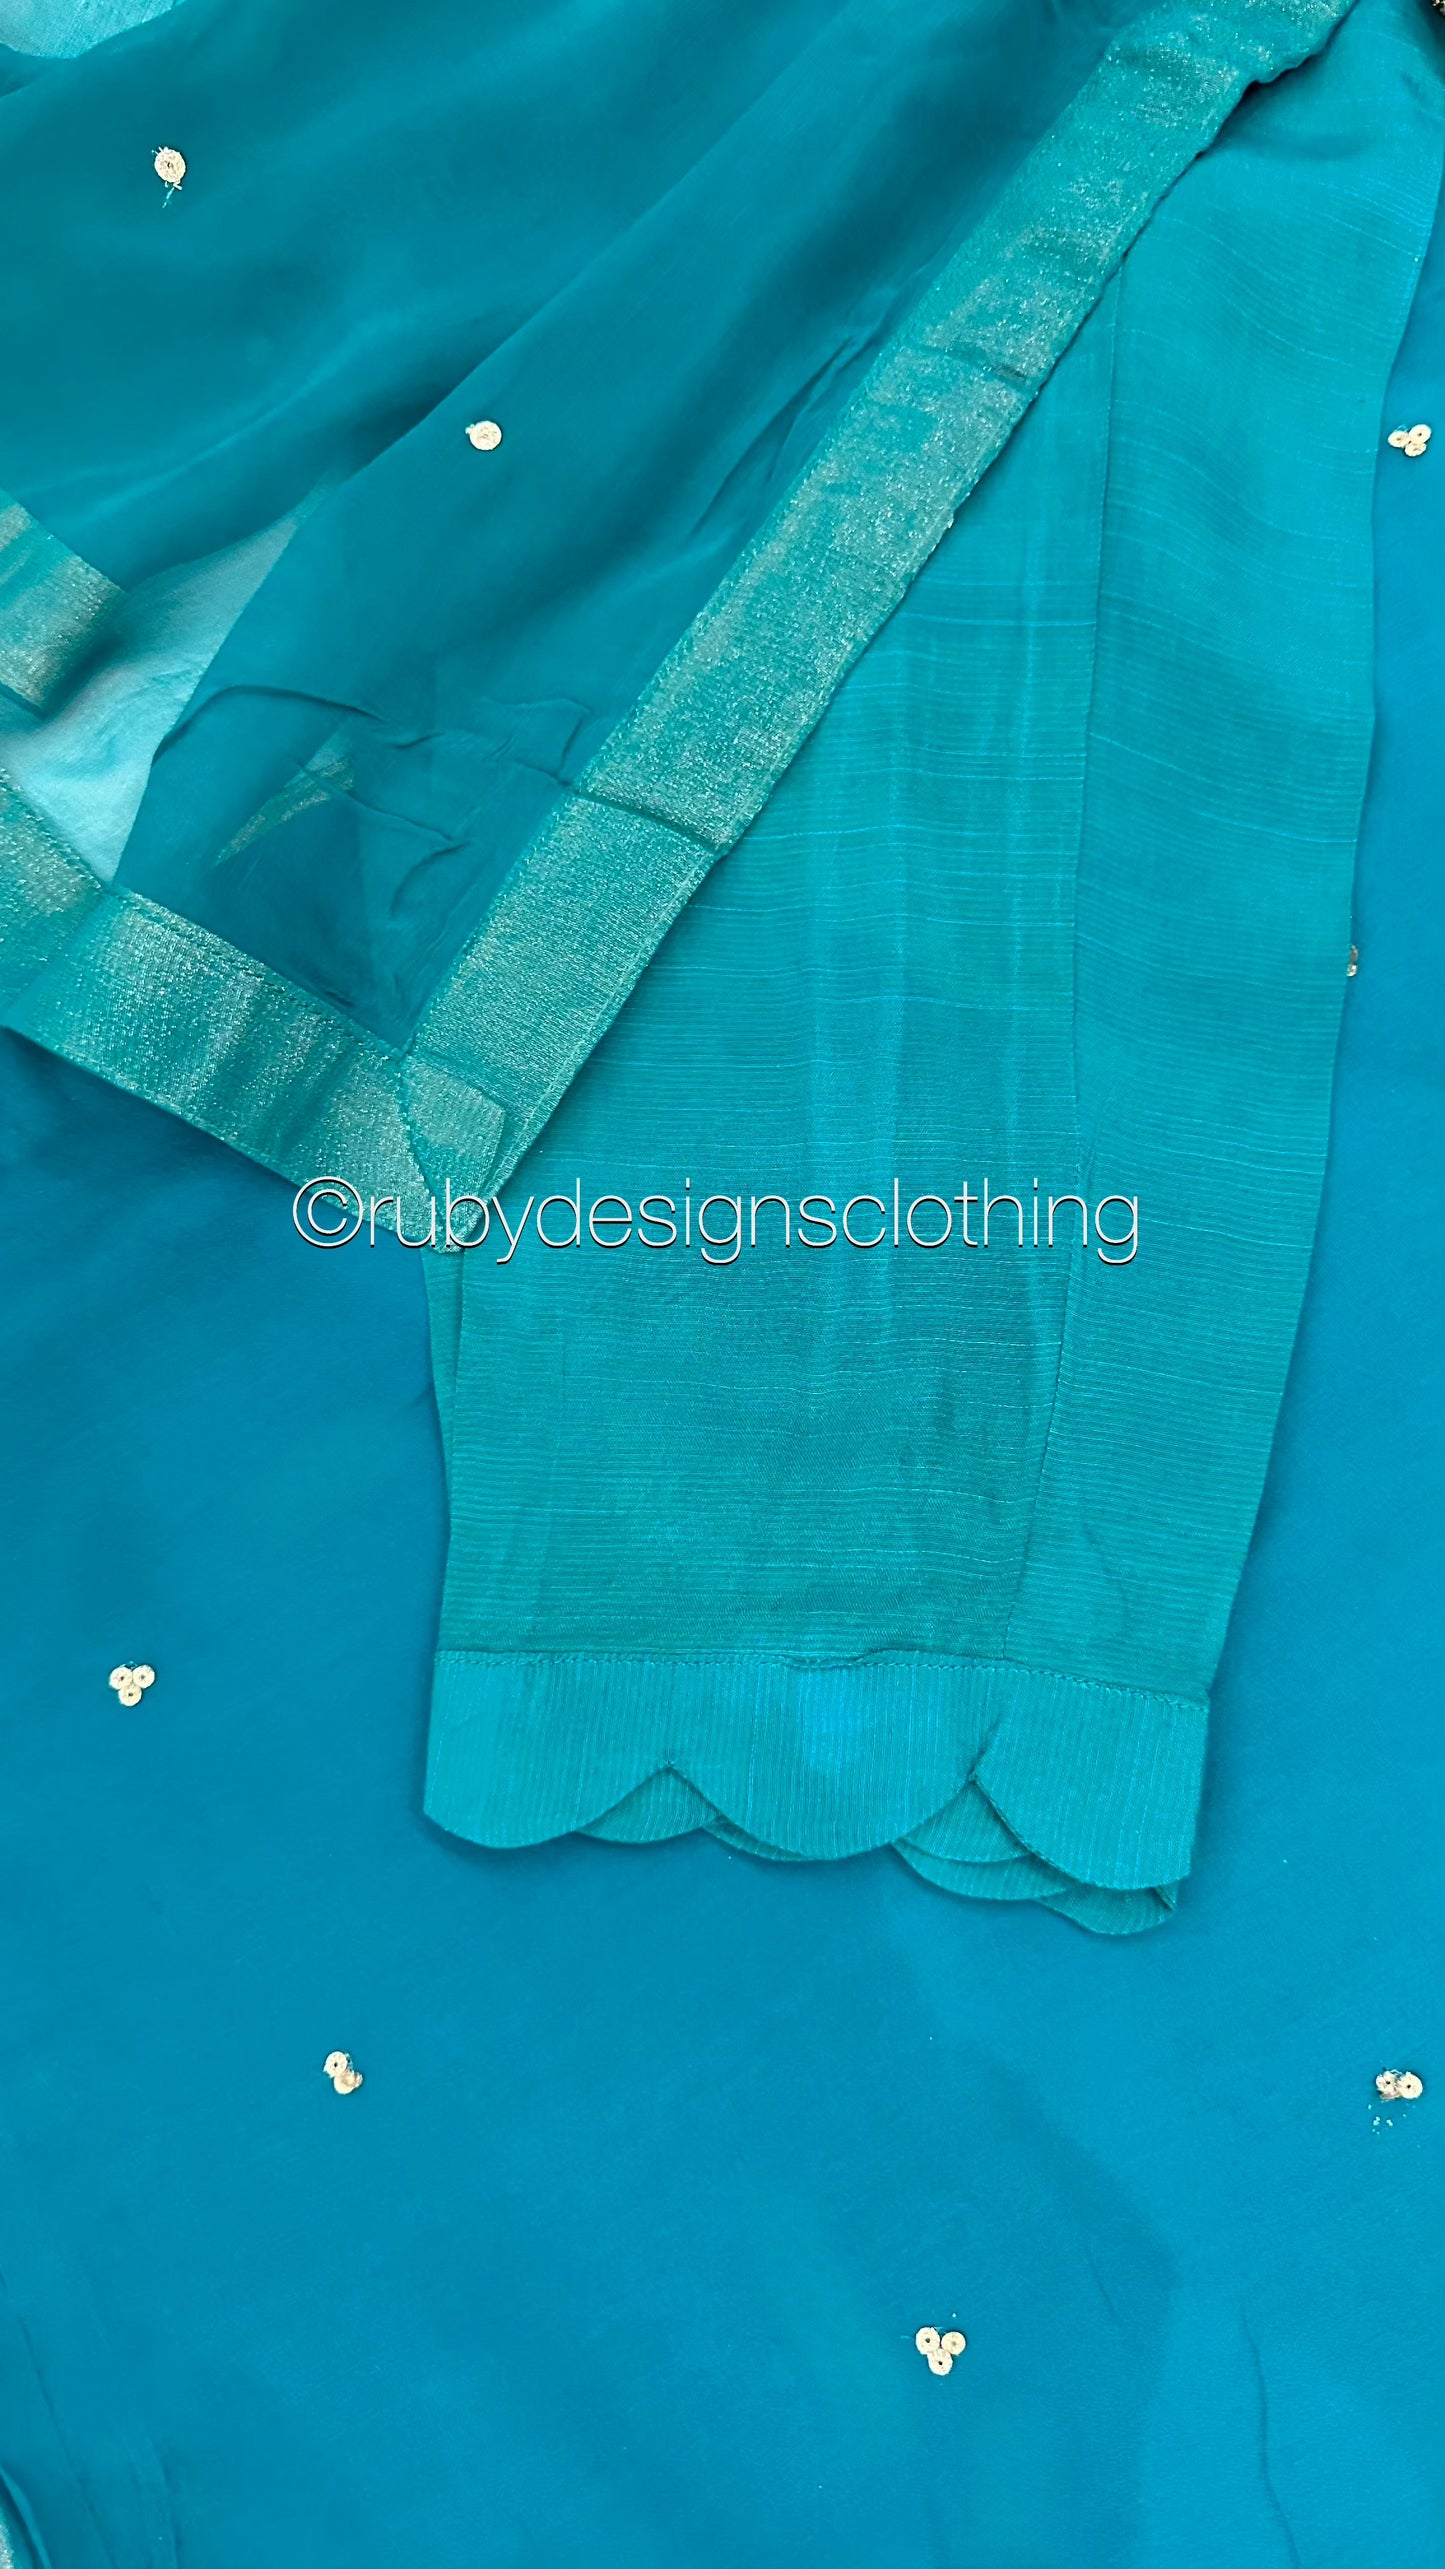 ALVIA Teal - 3 Piece Teal Chiffon Suit with Gold Handwork